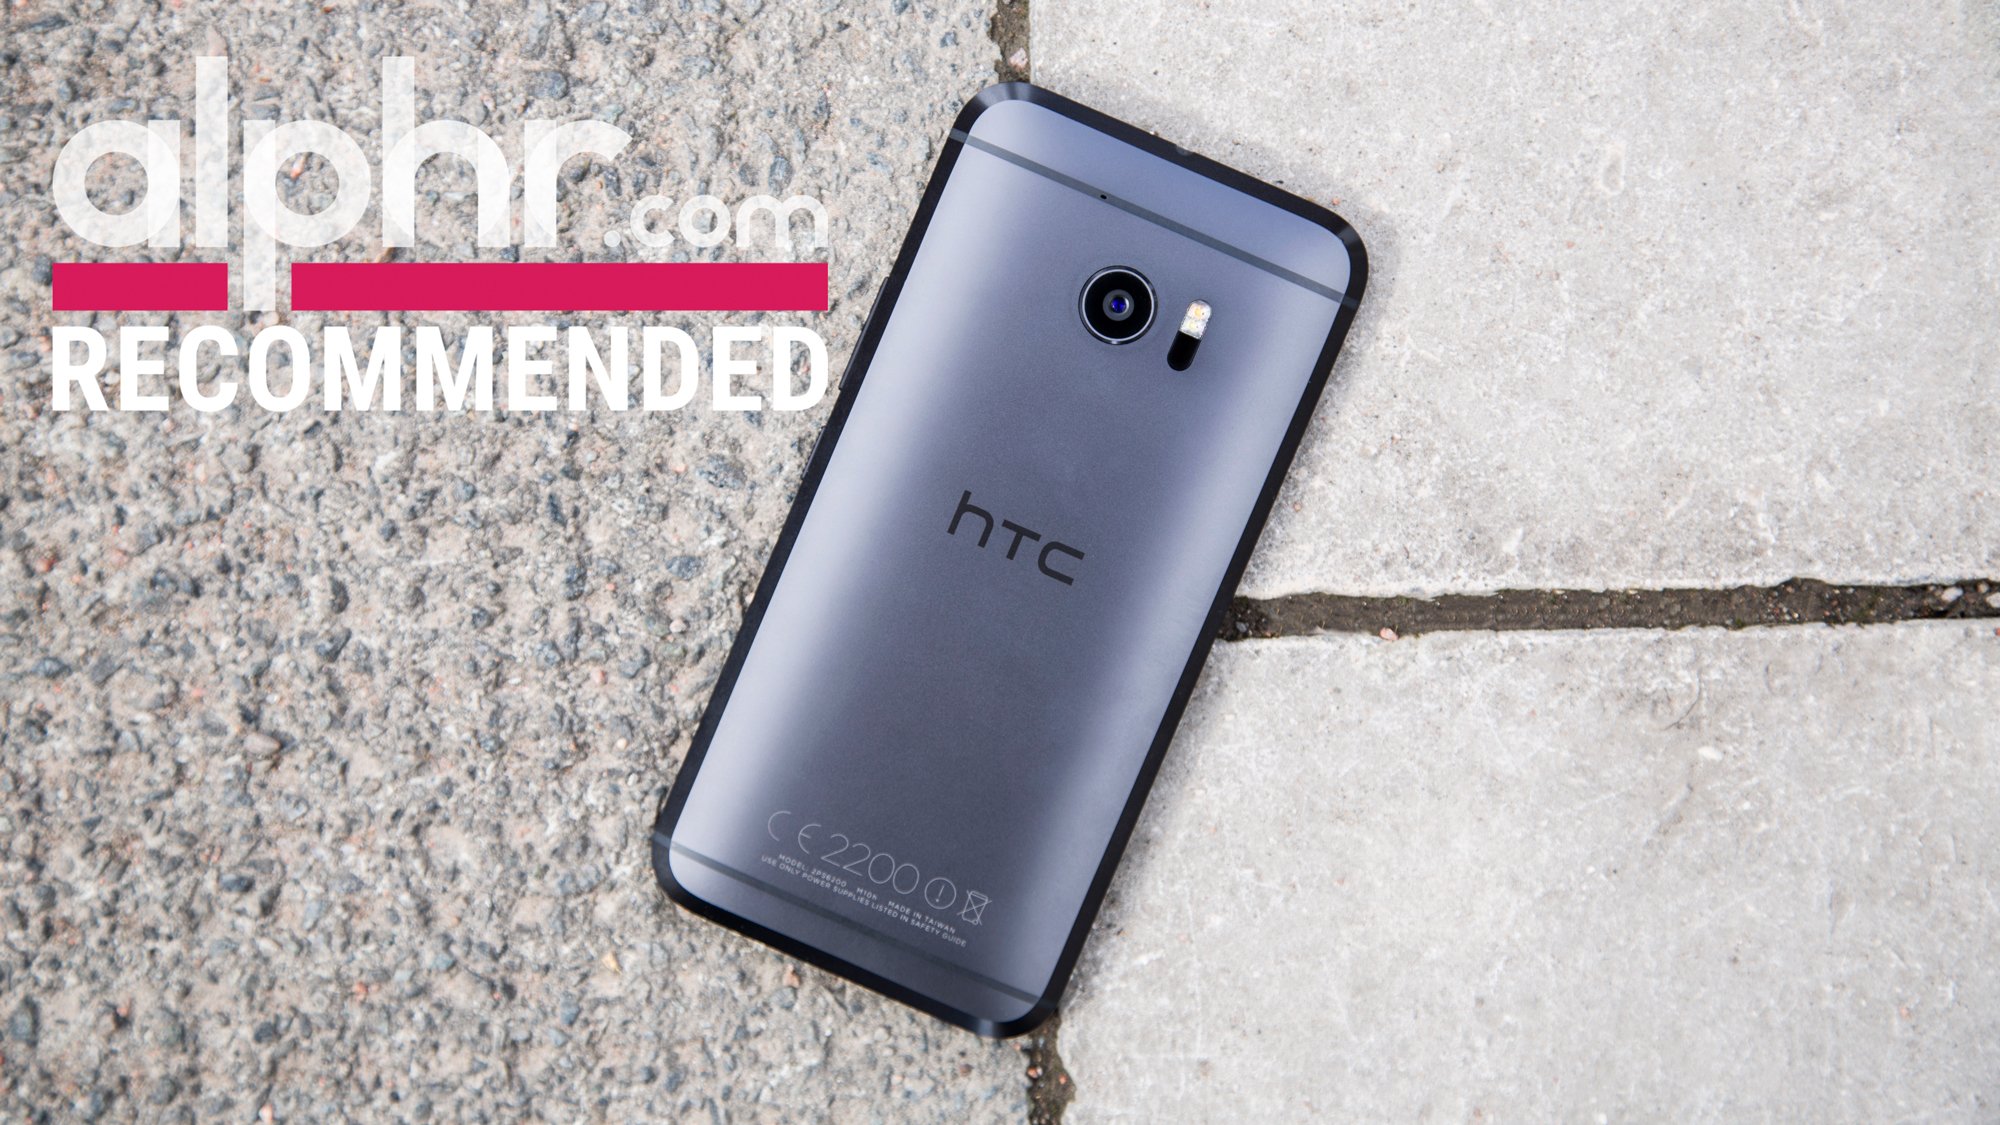 dat is alles sleuf Mijnwerker HTC 10 review: A good handset, but hard to recommend in 2018